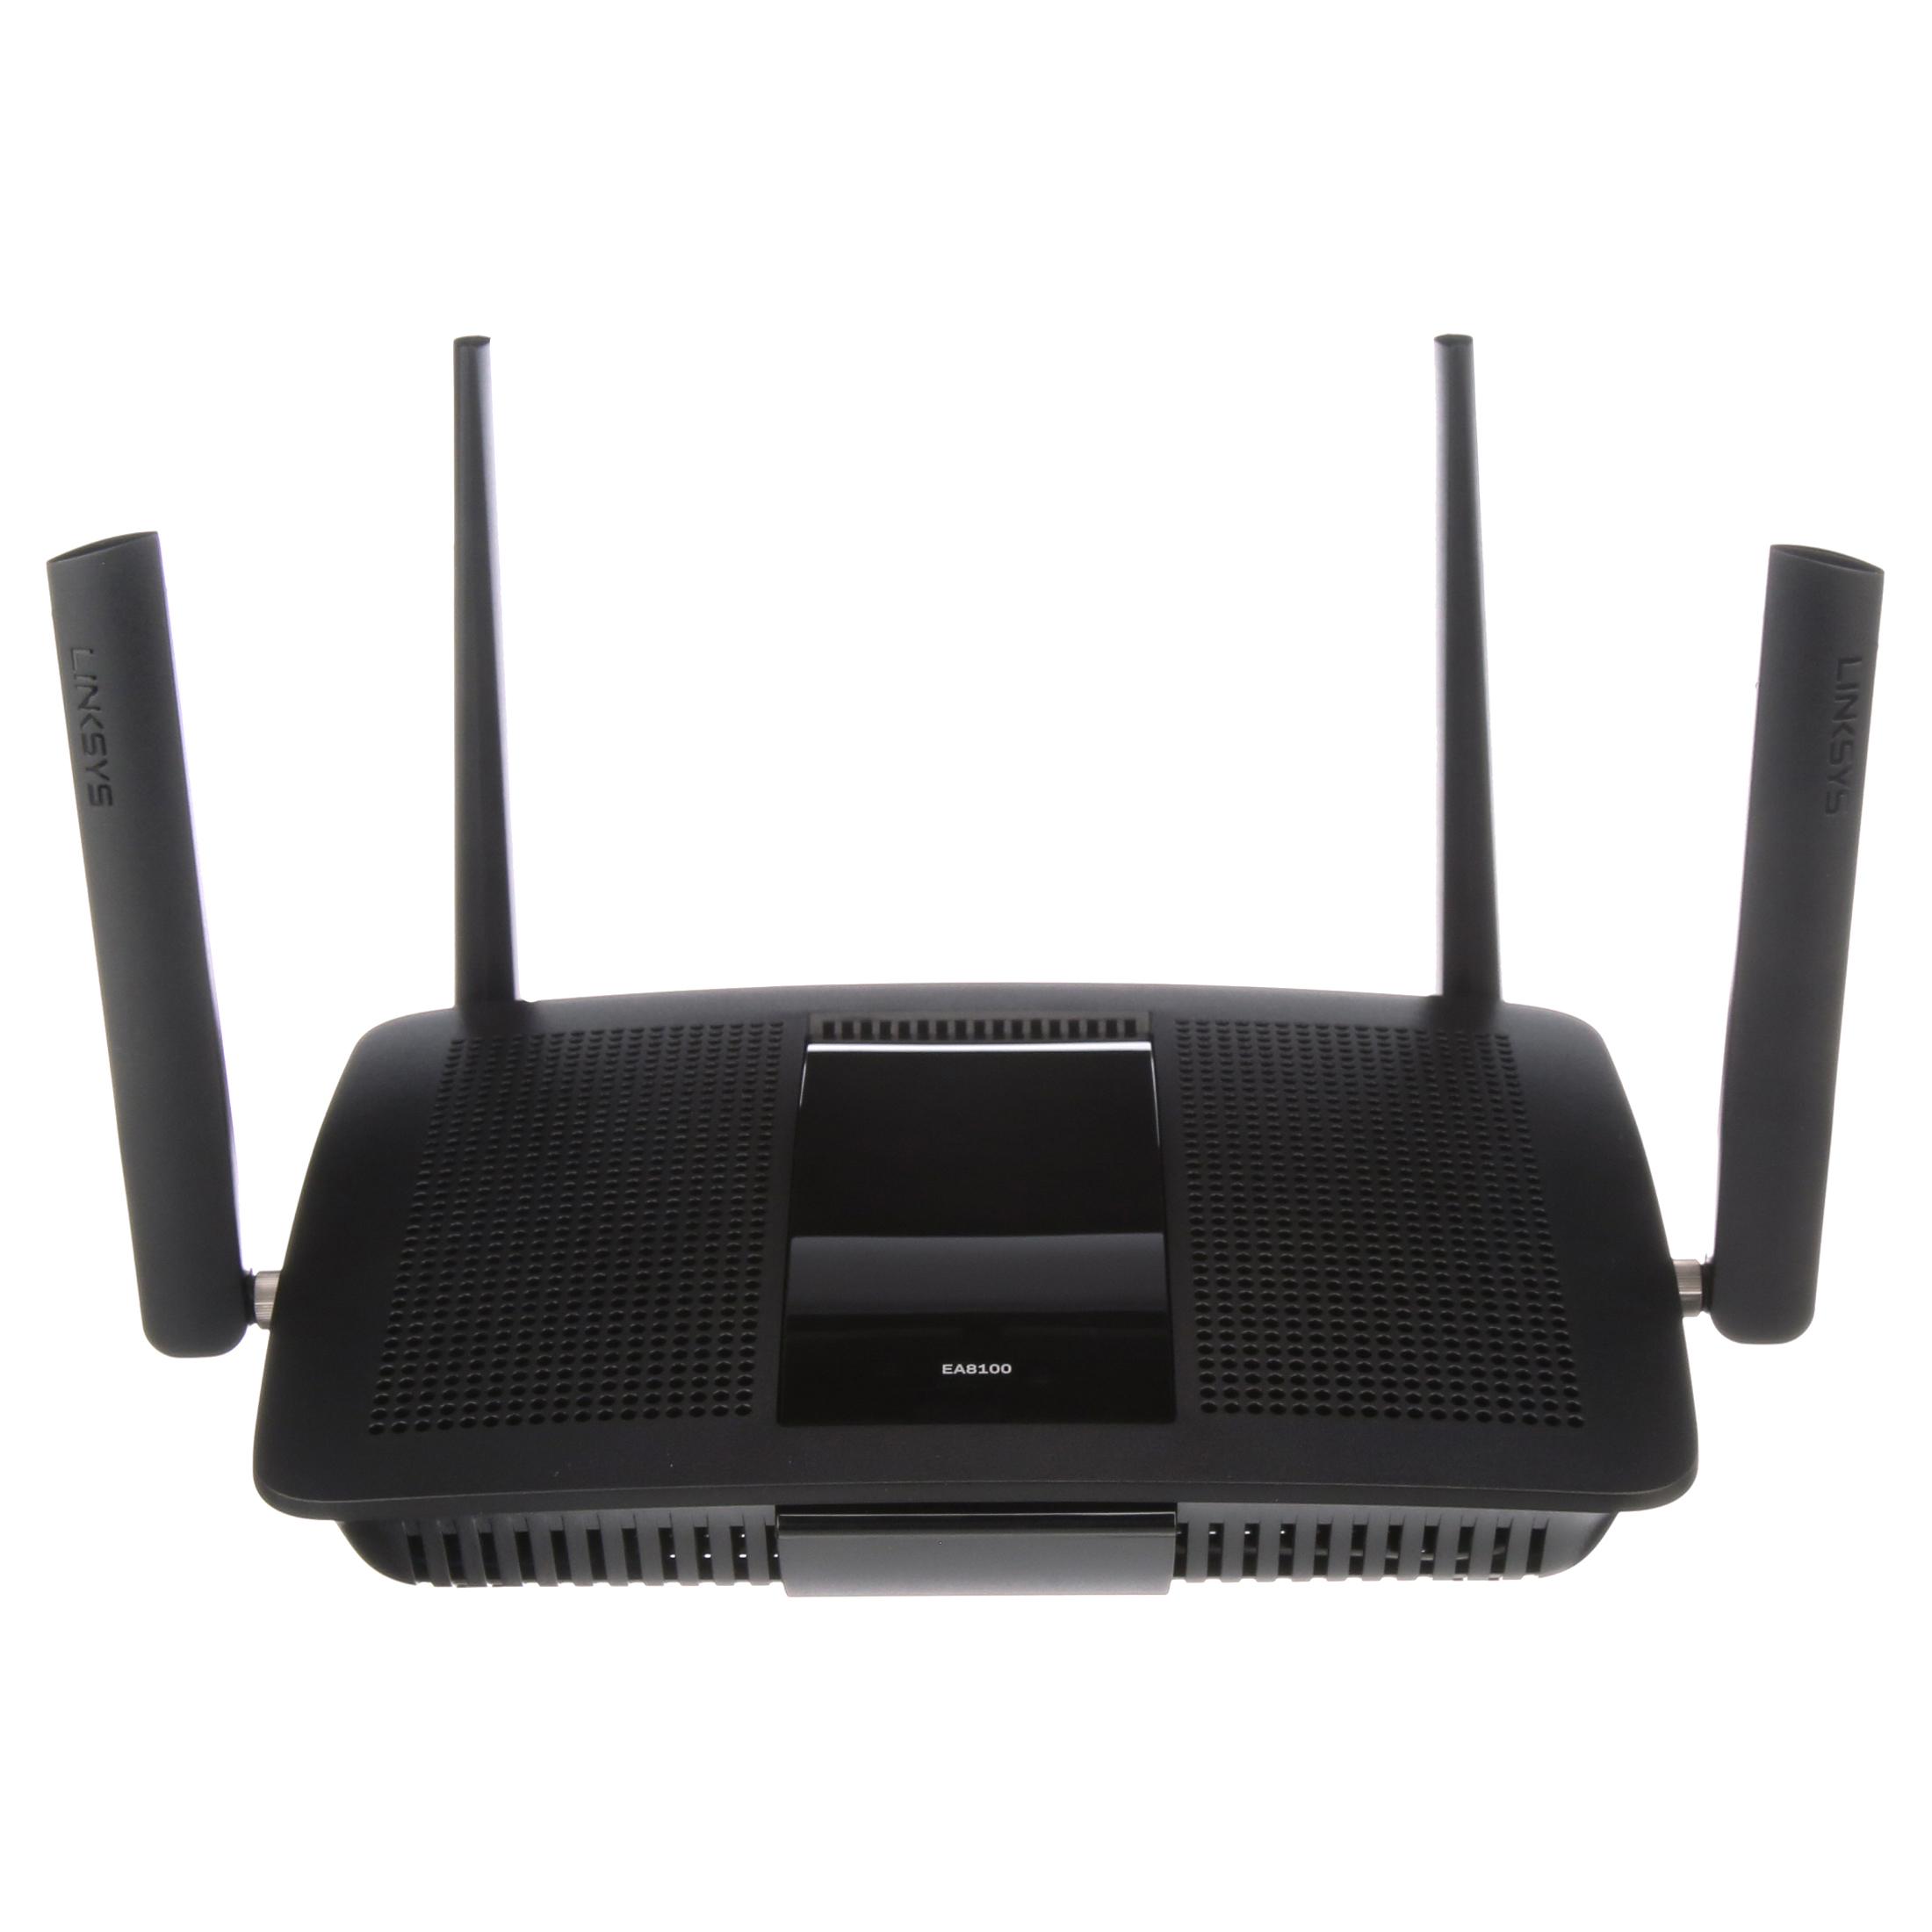 Linksys AC2600 4x4 MU-MIMO Dual-Band Gigabit Router with USB 3.0 and eSATA (EA8100) - image 8 of 9